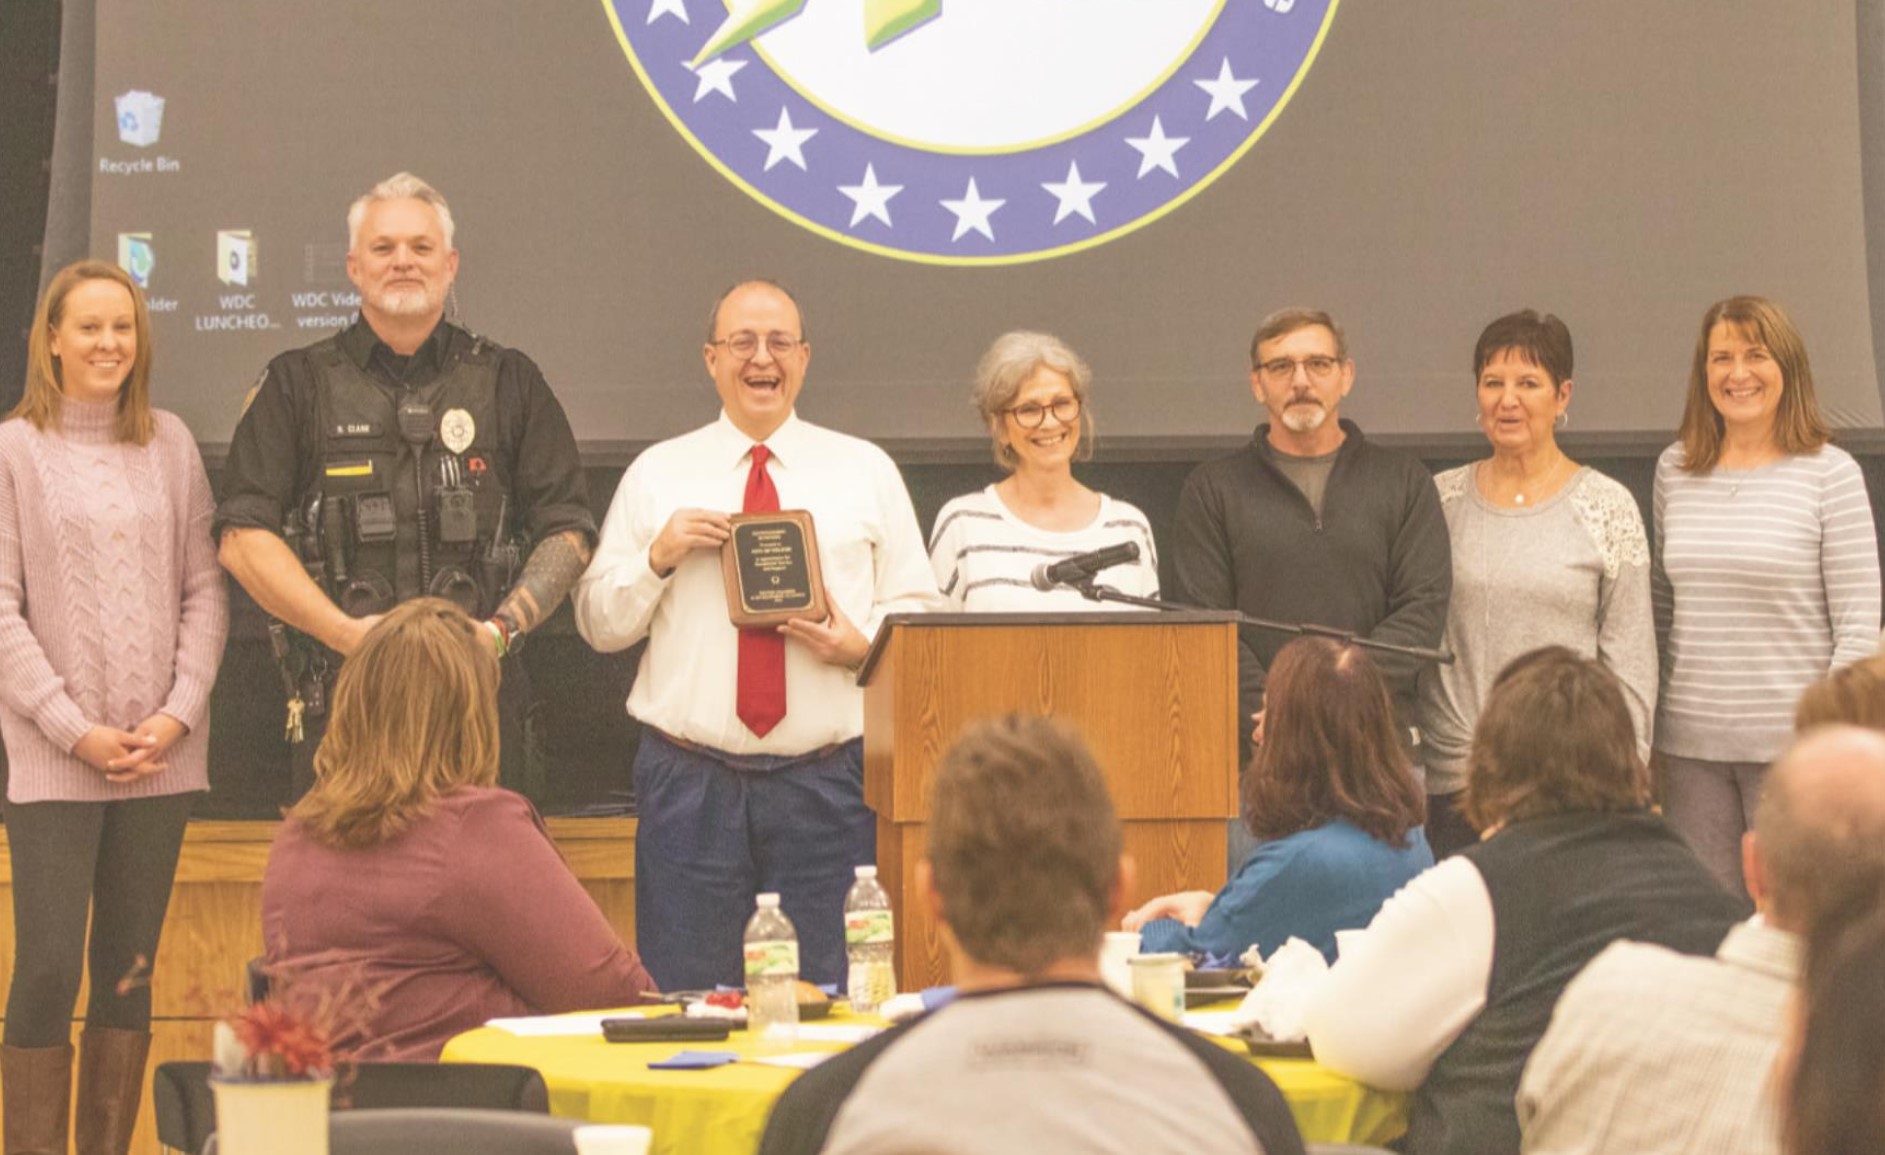 Pictured receiving the Outstanding Business Awards below are: City-Lizabeth Maurer, Dave Clark, Jeff Horne, Me, Light Plant-Pete Smith, Kathy Hartman, Lori Brown. 